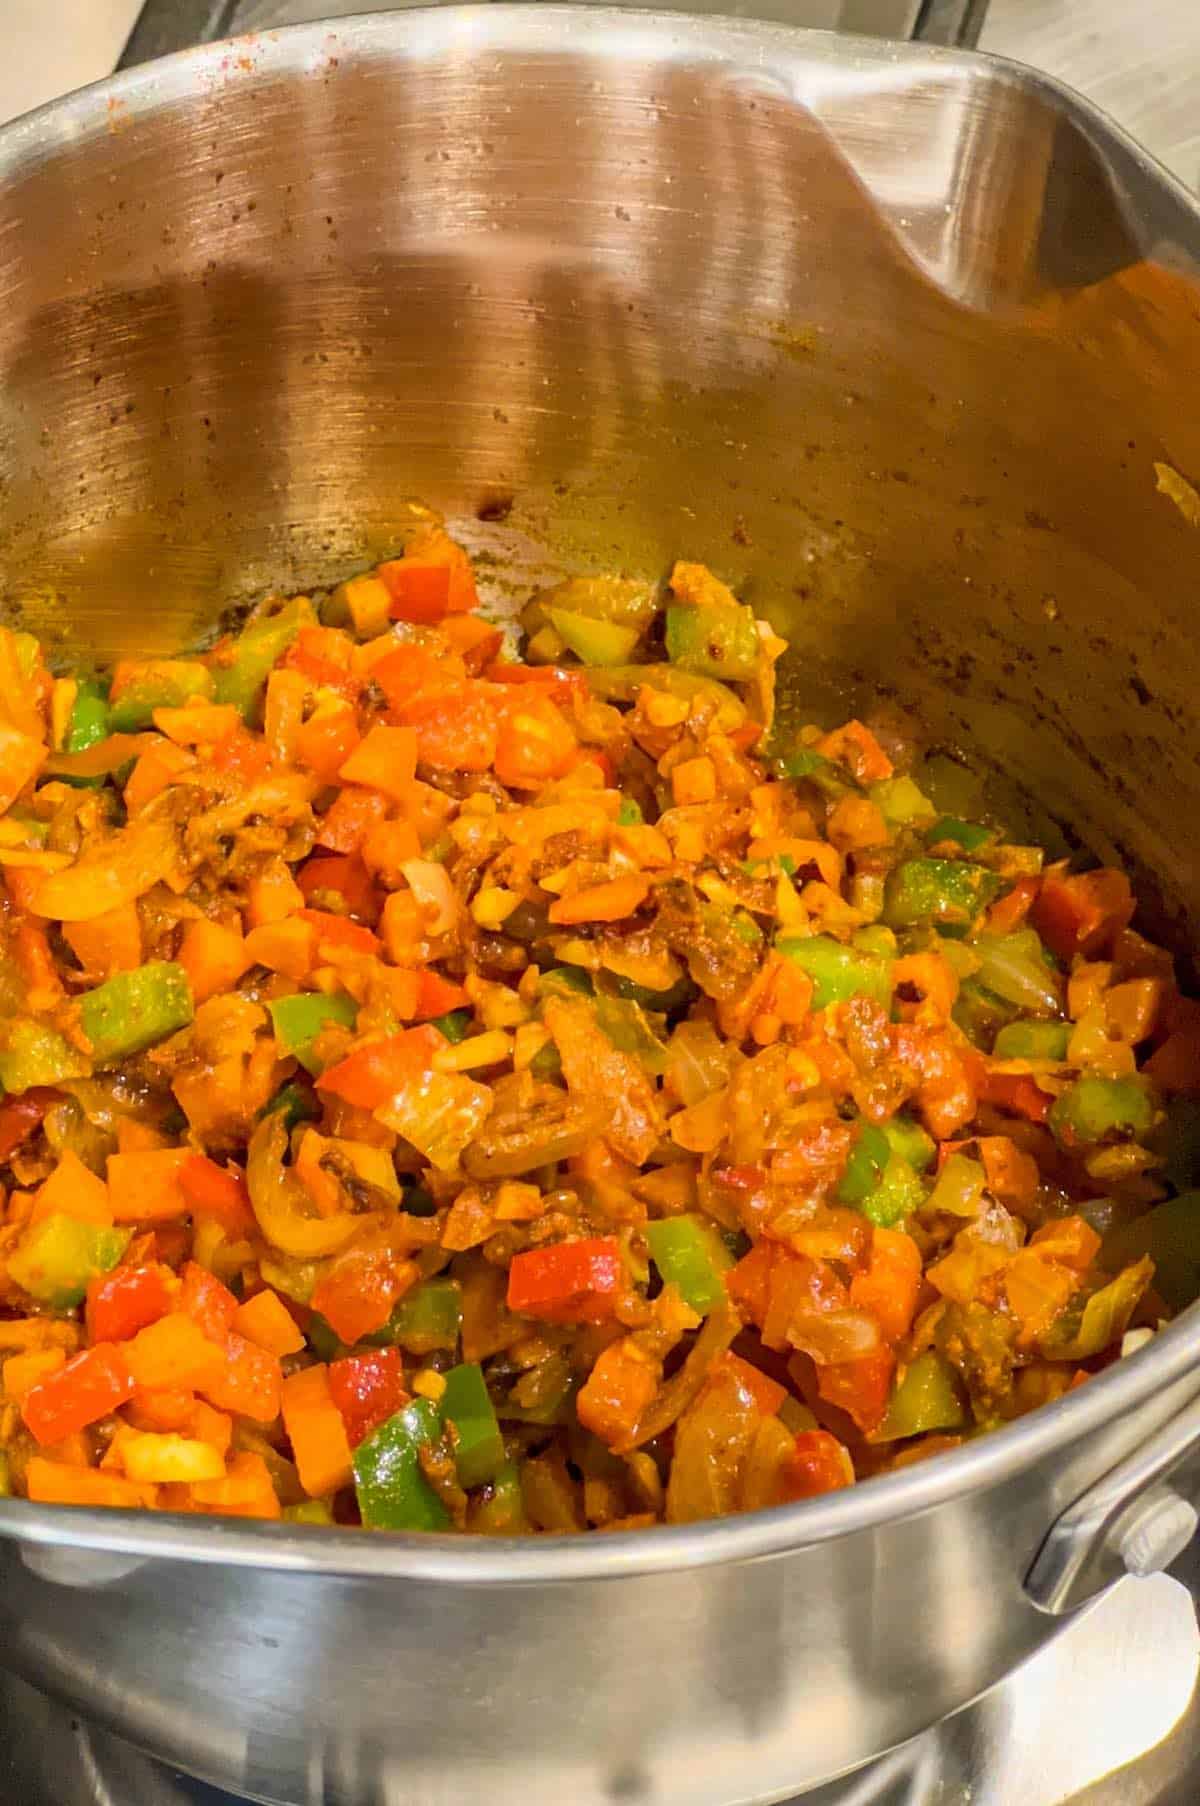 Vegetables cooking in a saucepan for the Nando's spicy rice